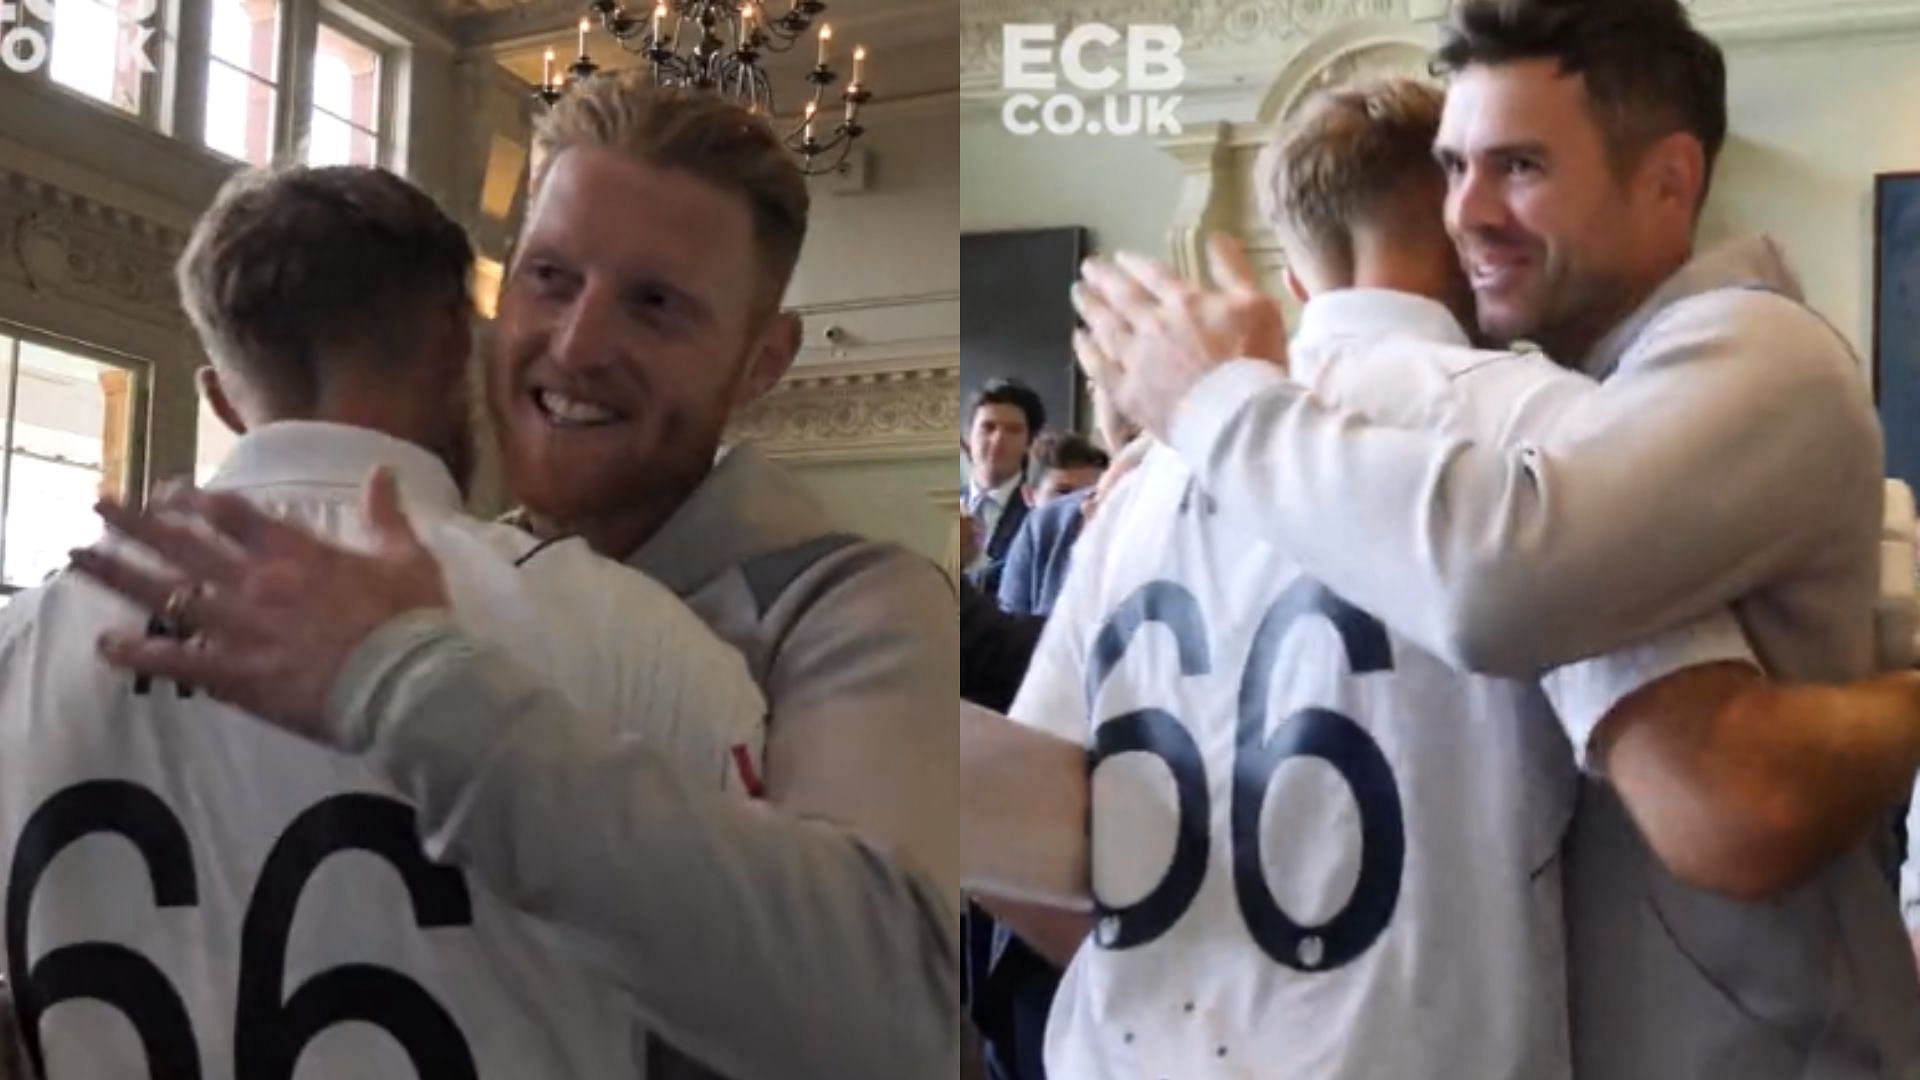 Snippets of a video posted by England Cricket on Twitter.